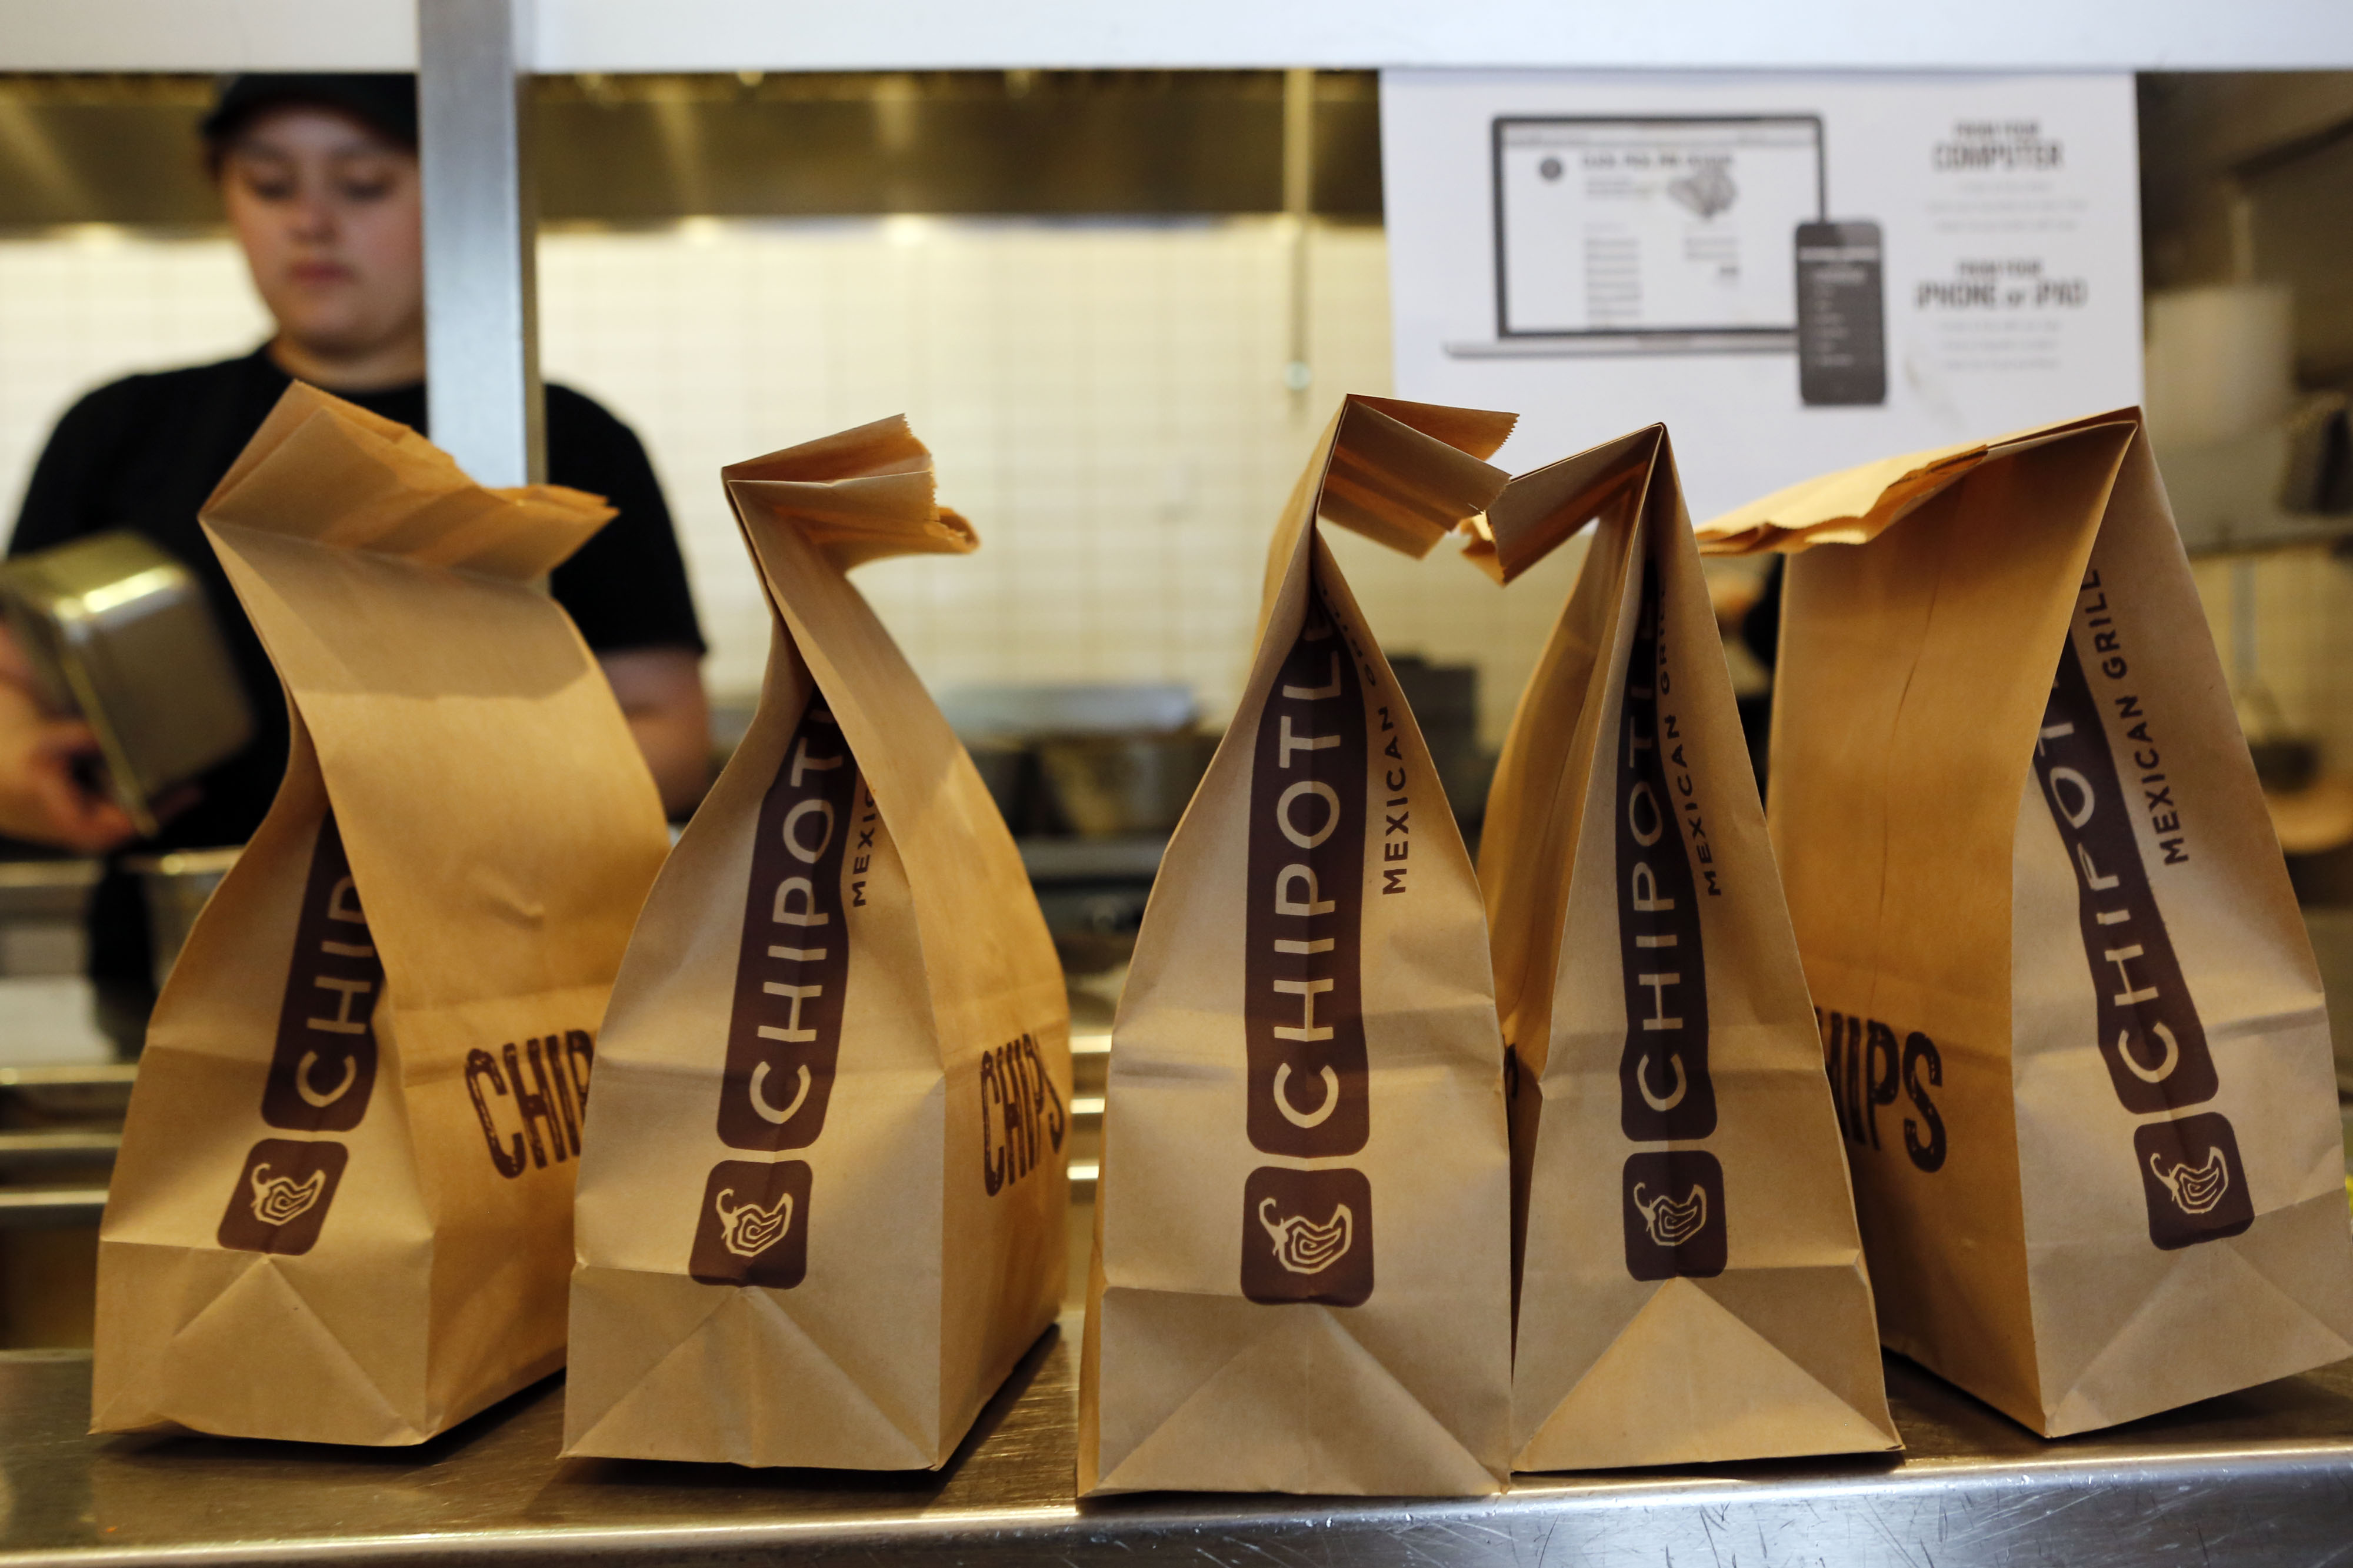 Bags of tortilla chips sit in a row at a Chipotle Mexican Grill Inc. restaurant in Hollywood, California on July 16, 2013.